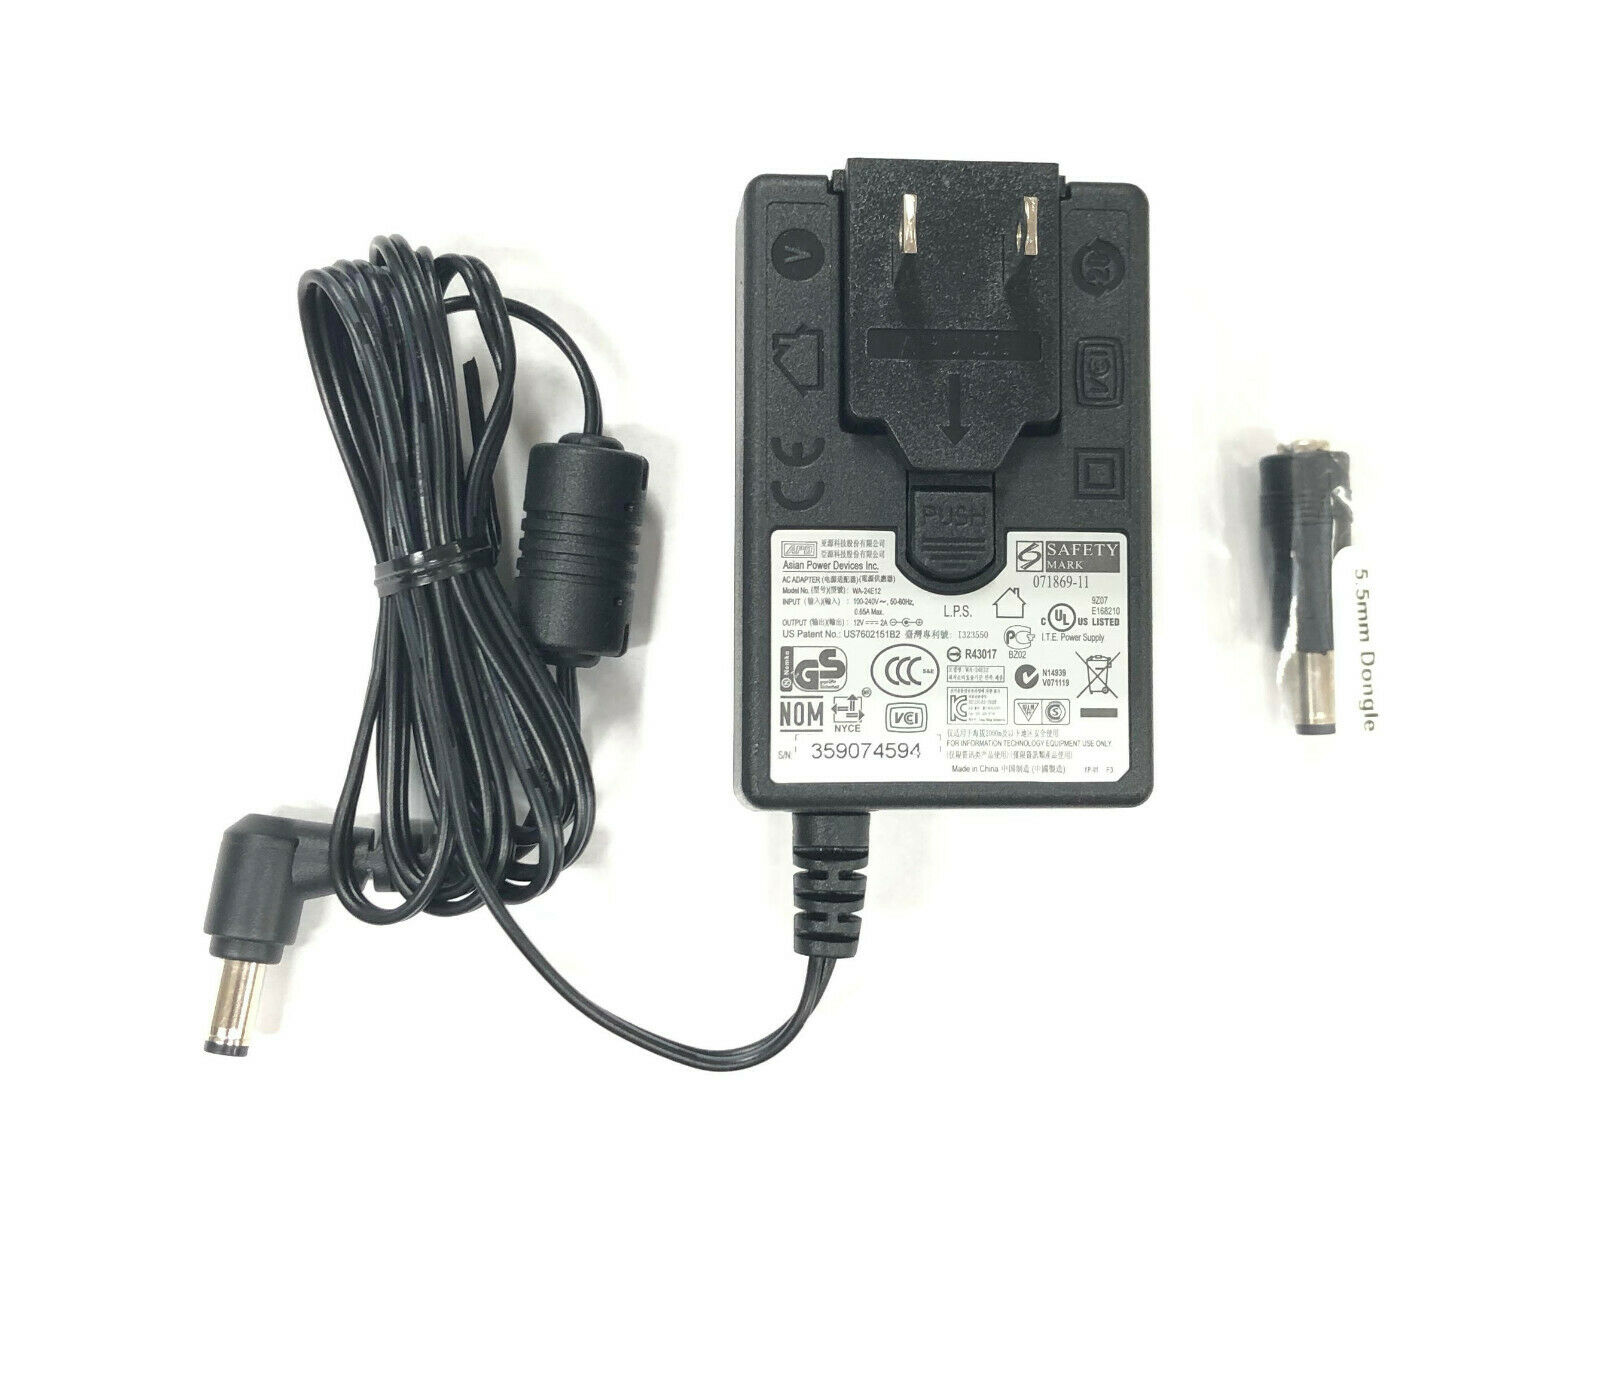 New Geniune ADP AC Adapter WA-24E12 12V For WD My Book Elite: WDBAAH0010HCH Compatible Brand: Western Digital Type: